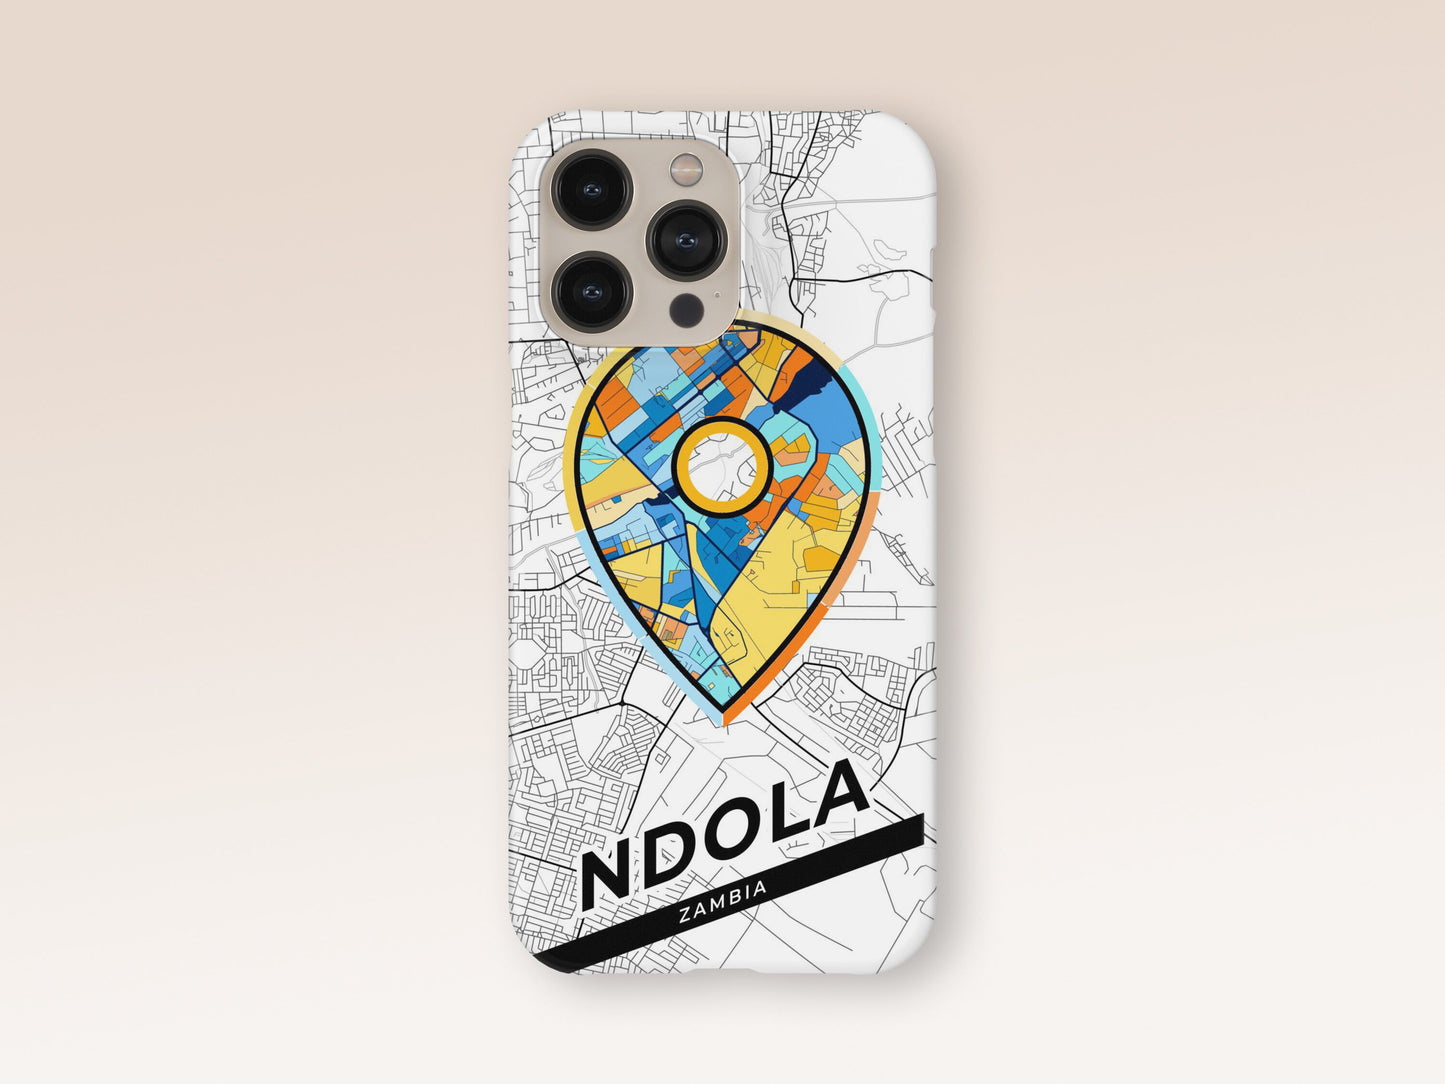 Ndola Zambia slim phone case with colorful icon. Birthday, wedding or housewarming gift. Couple match cases. 1